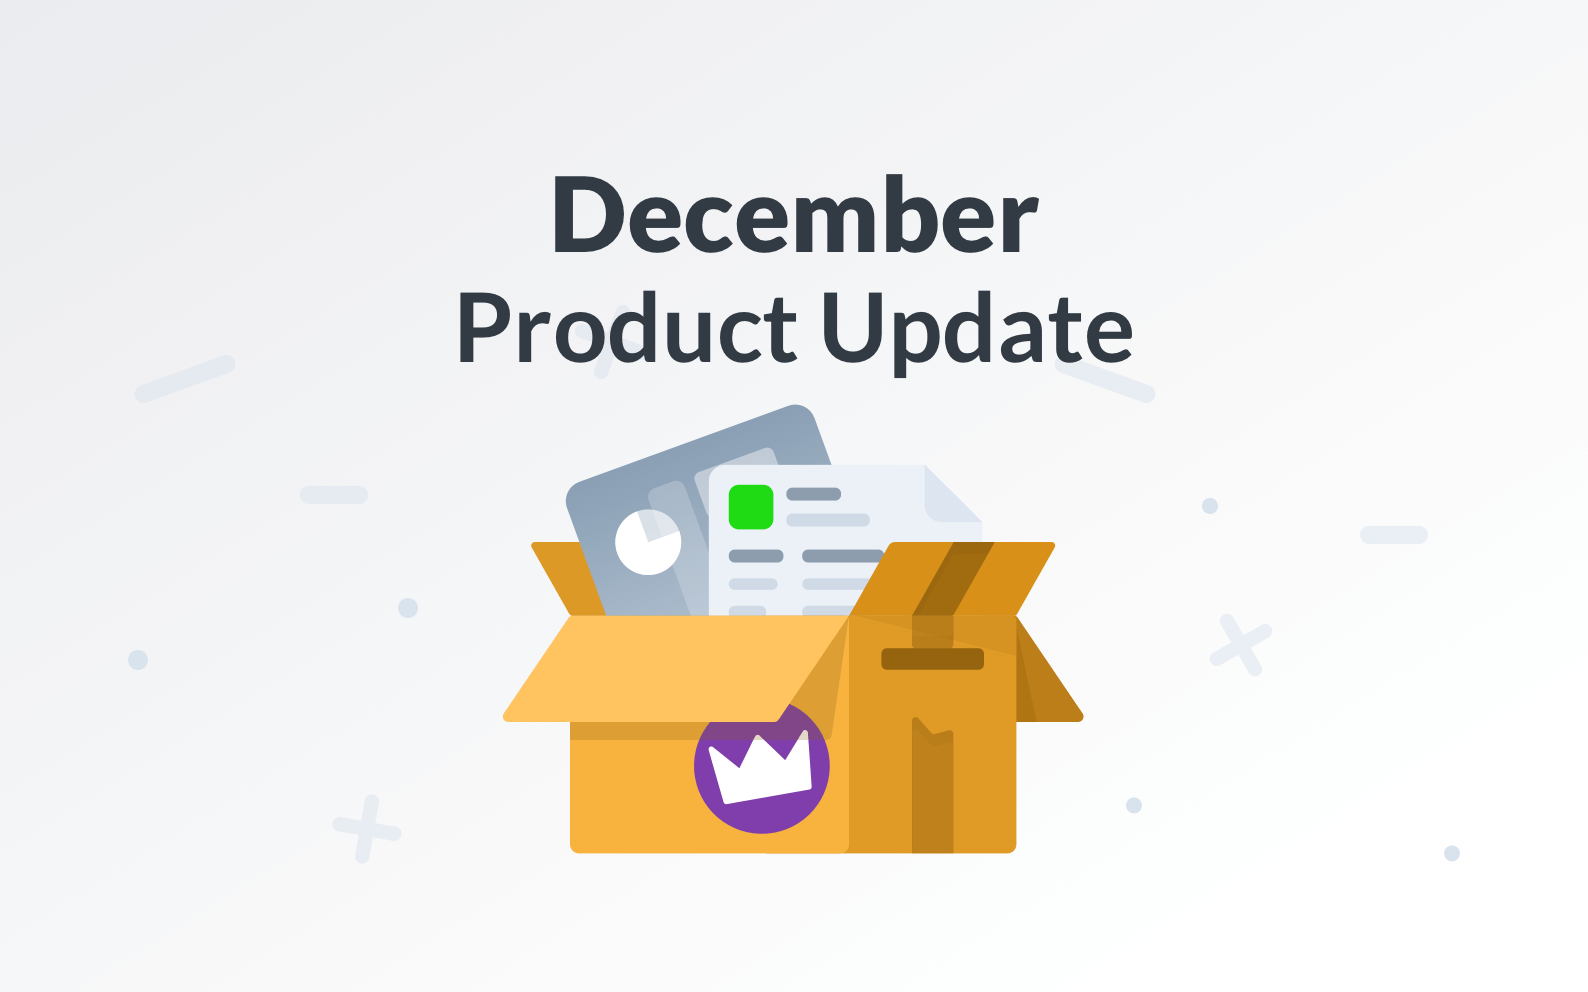 December Product Update